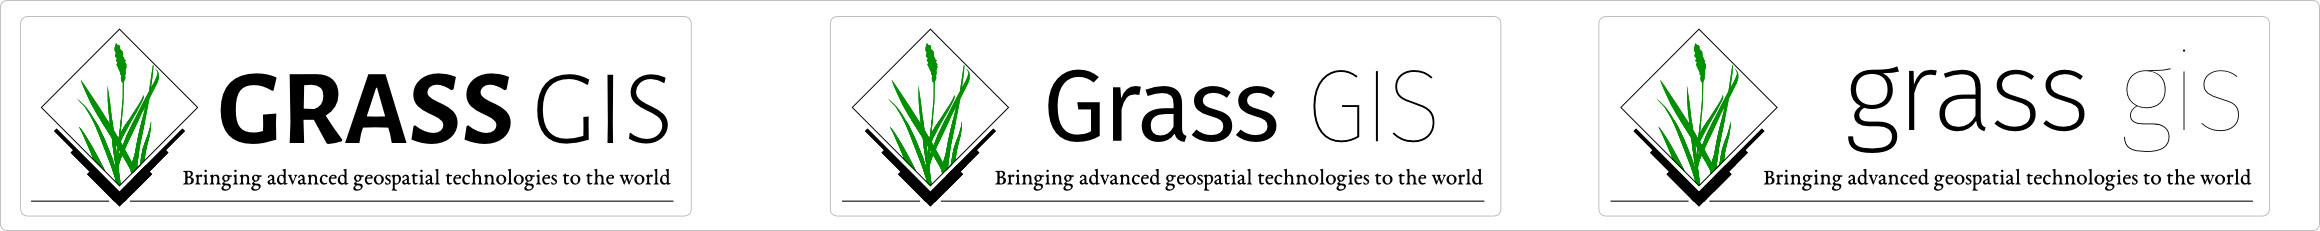 Thumbnail for File:GRASSGIS welcome synthesis.jpg